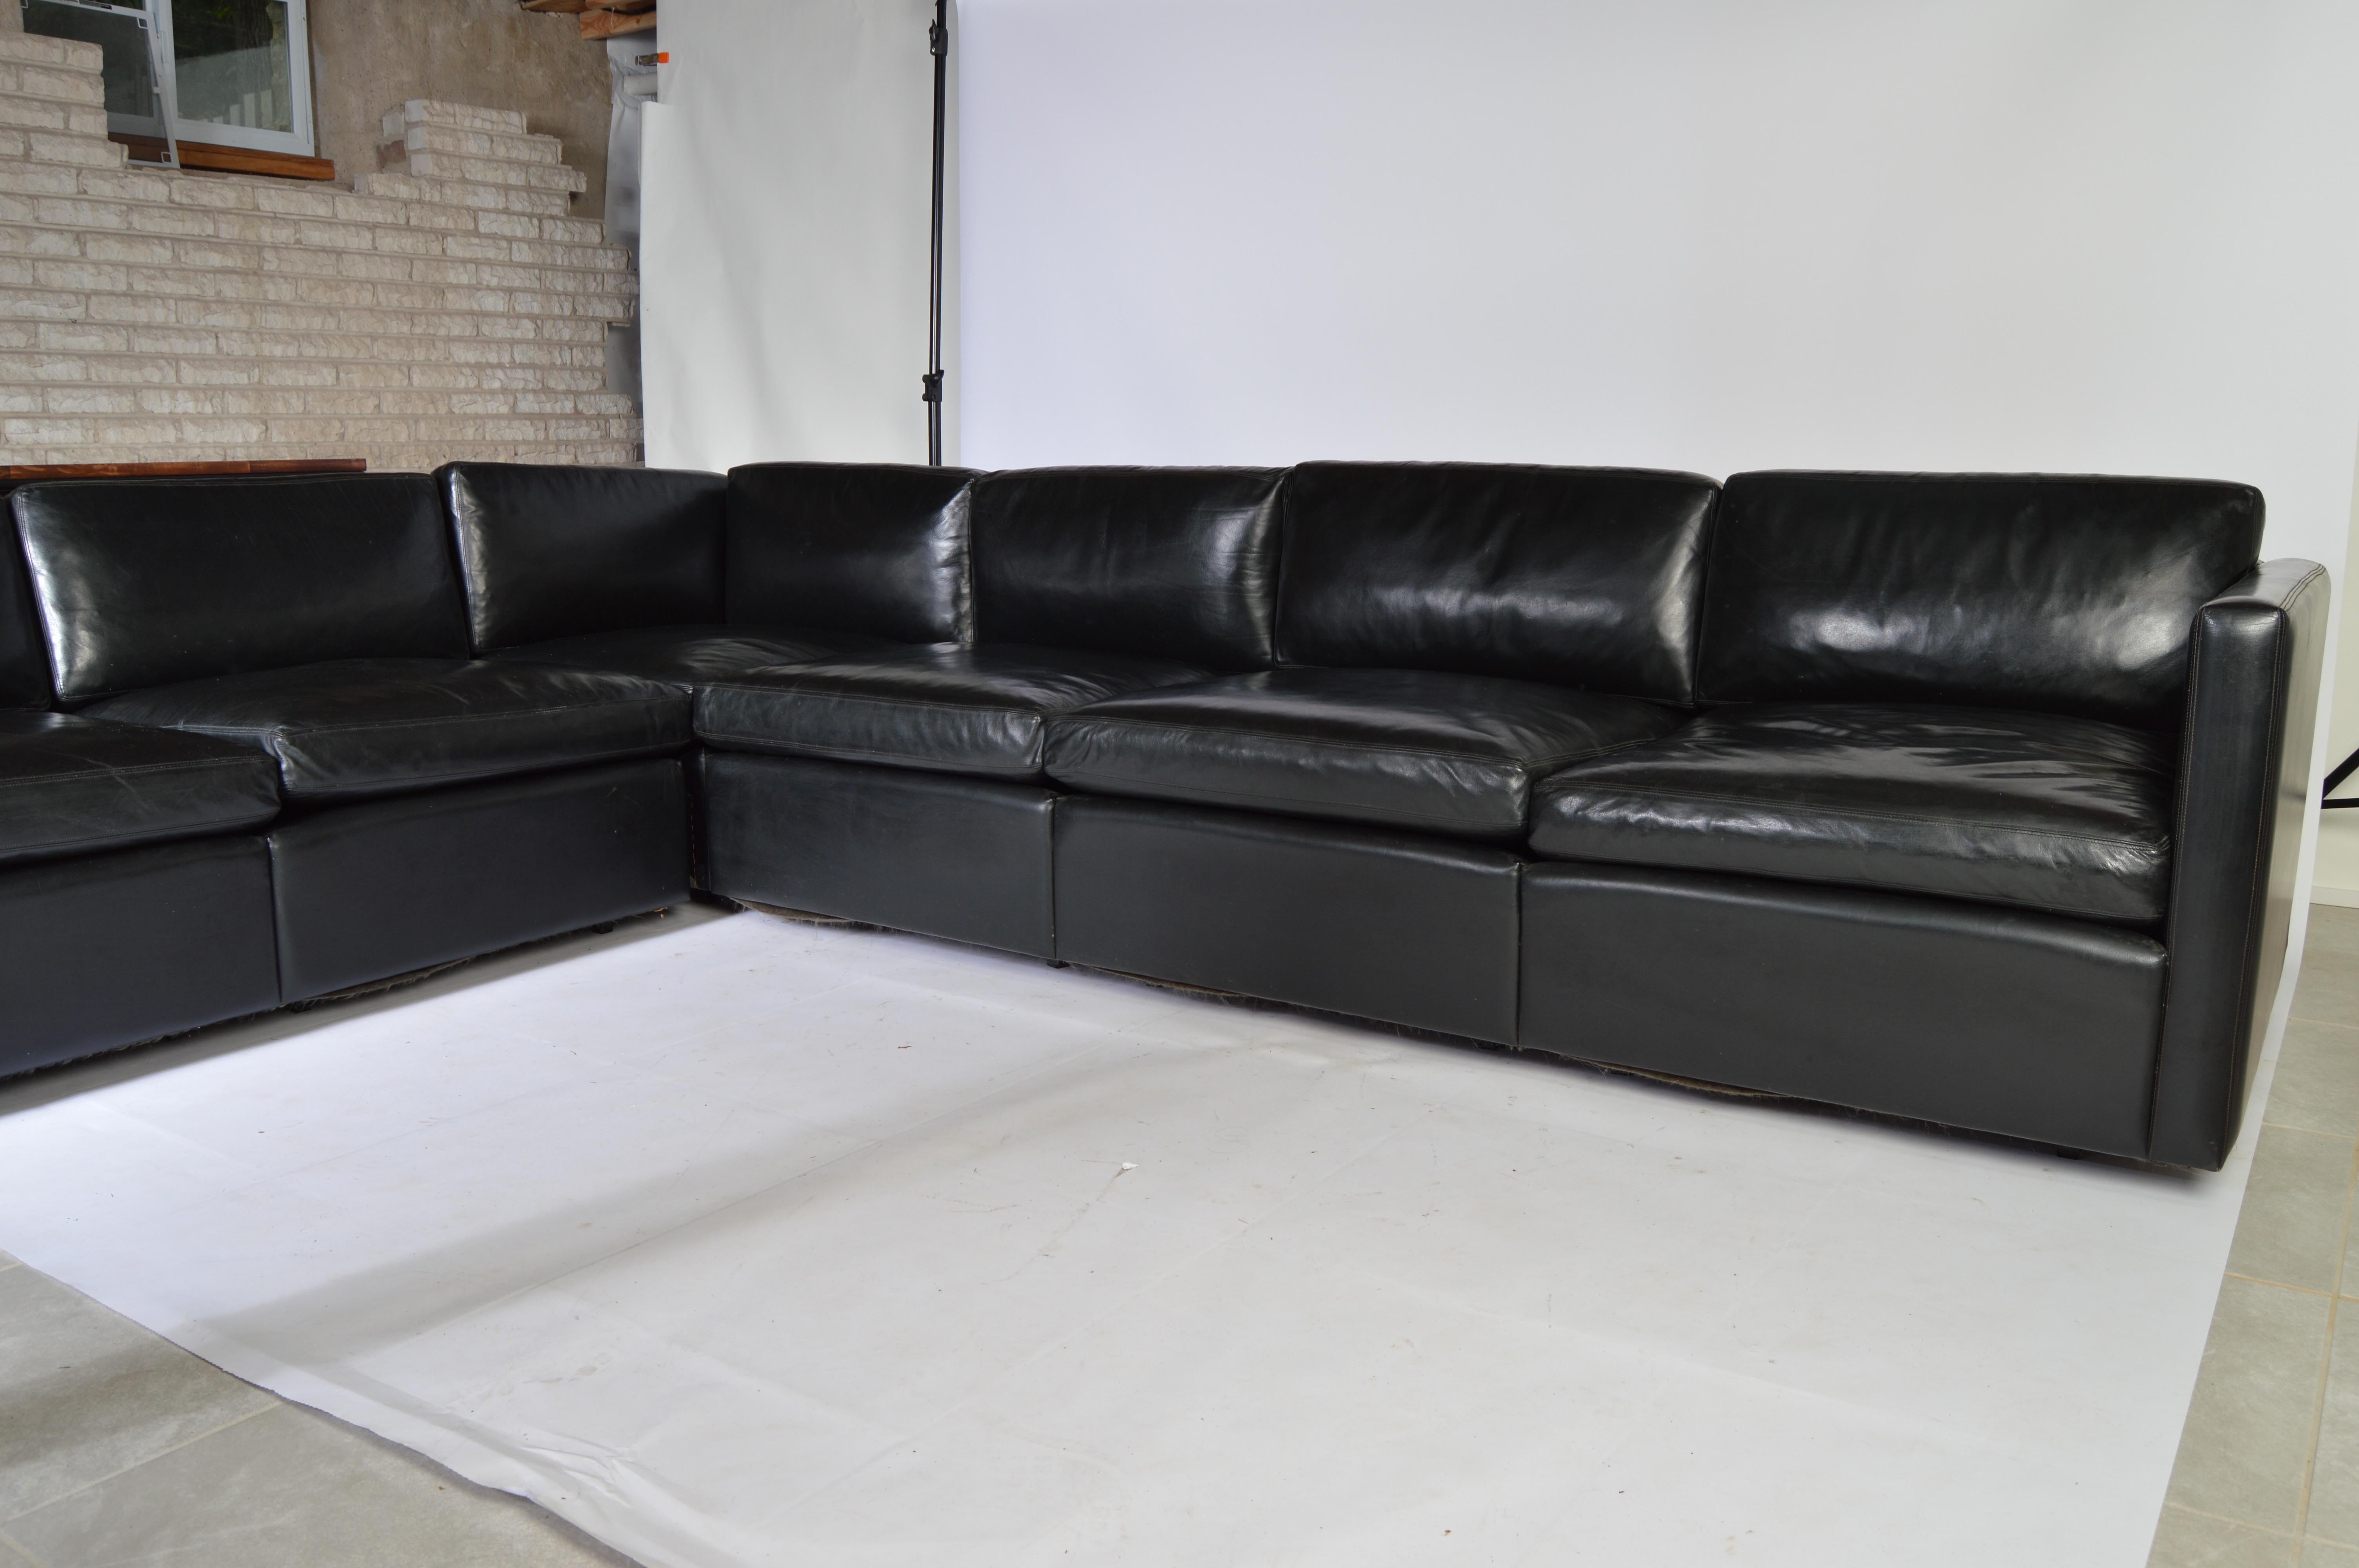 A phenomenal black leather sectional designed by Charles Pfister for Knoll. Each section has the original tag underneath. It is not too often that you see a vintage example in leather.
Executive office usage. Leather is in fantastic condition as